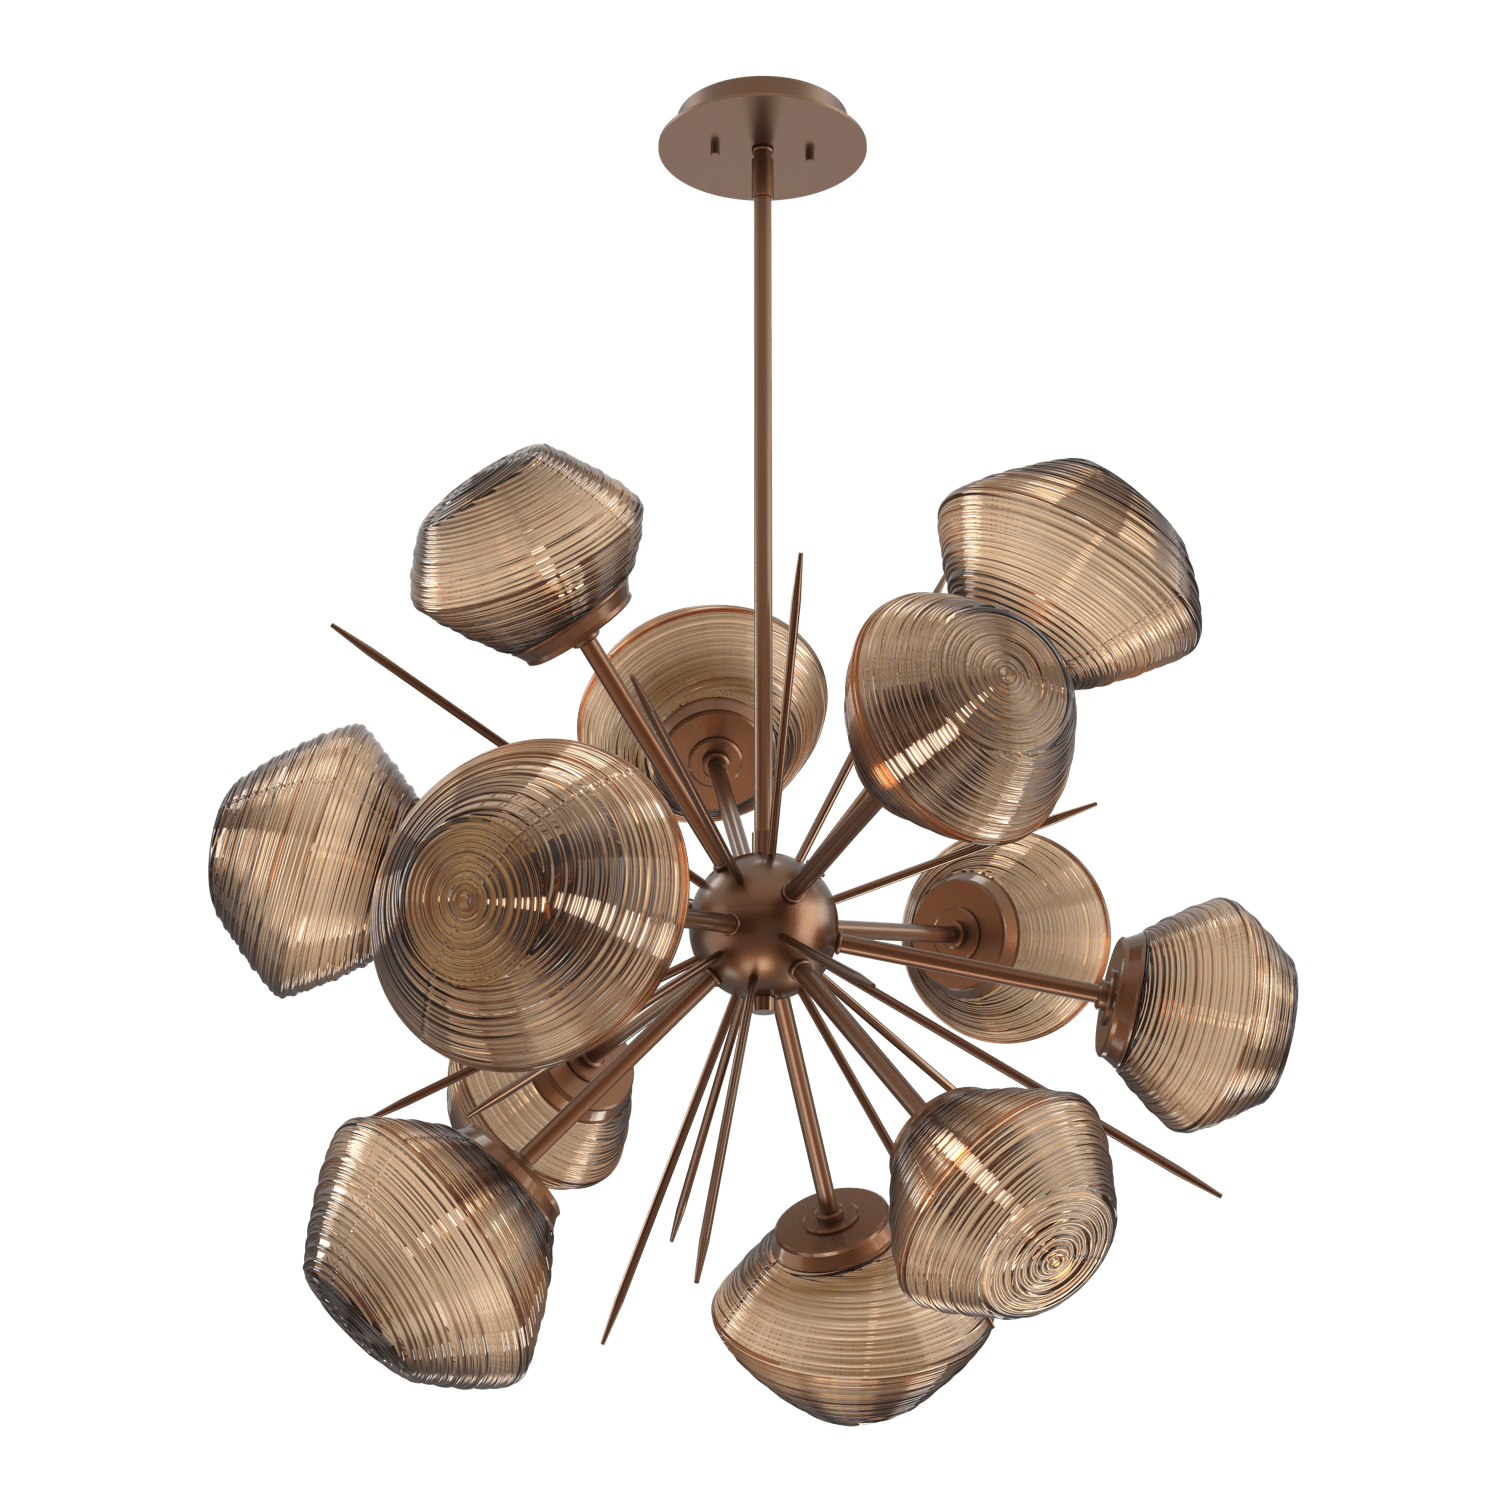 CHB0089-0G-BB-B-Hammerton-Studio-Mesa-36-inch-starburst-chandelier-with-burnished-bronze-finish-and-bronze-blown-glass-shades-and-LED-lamping